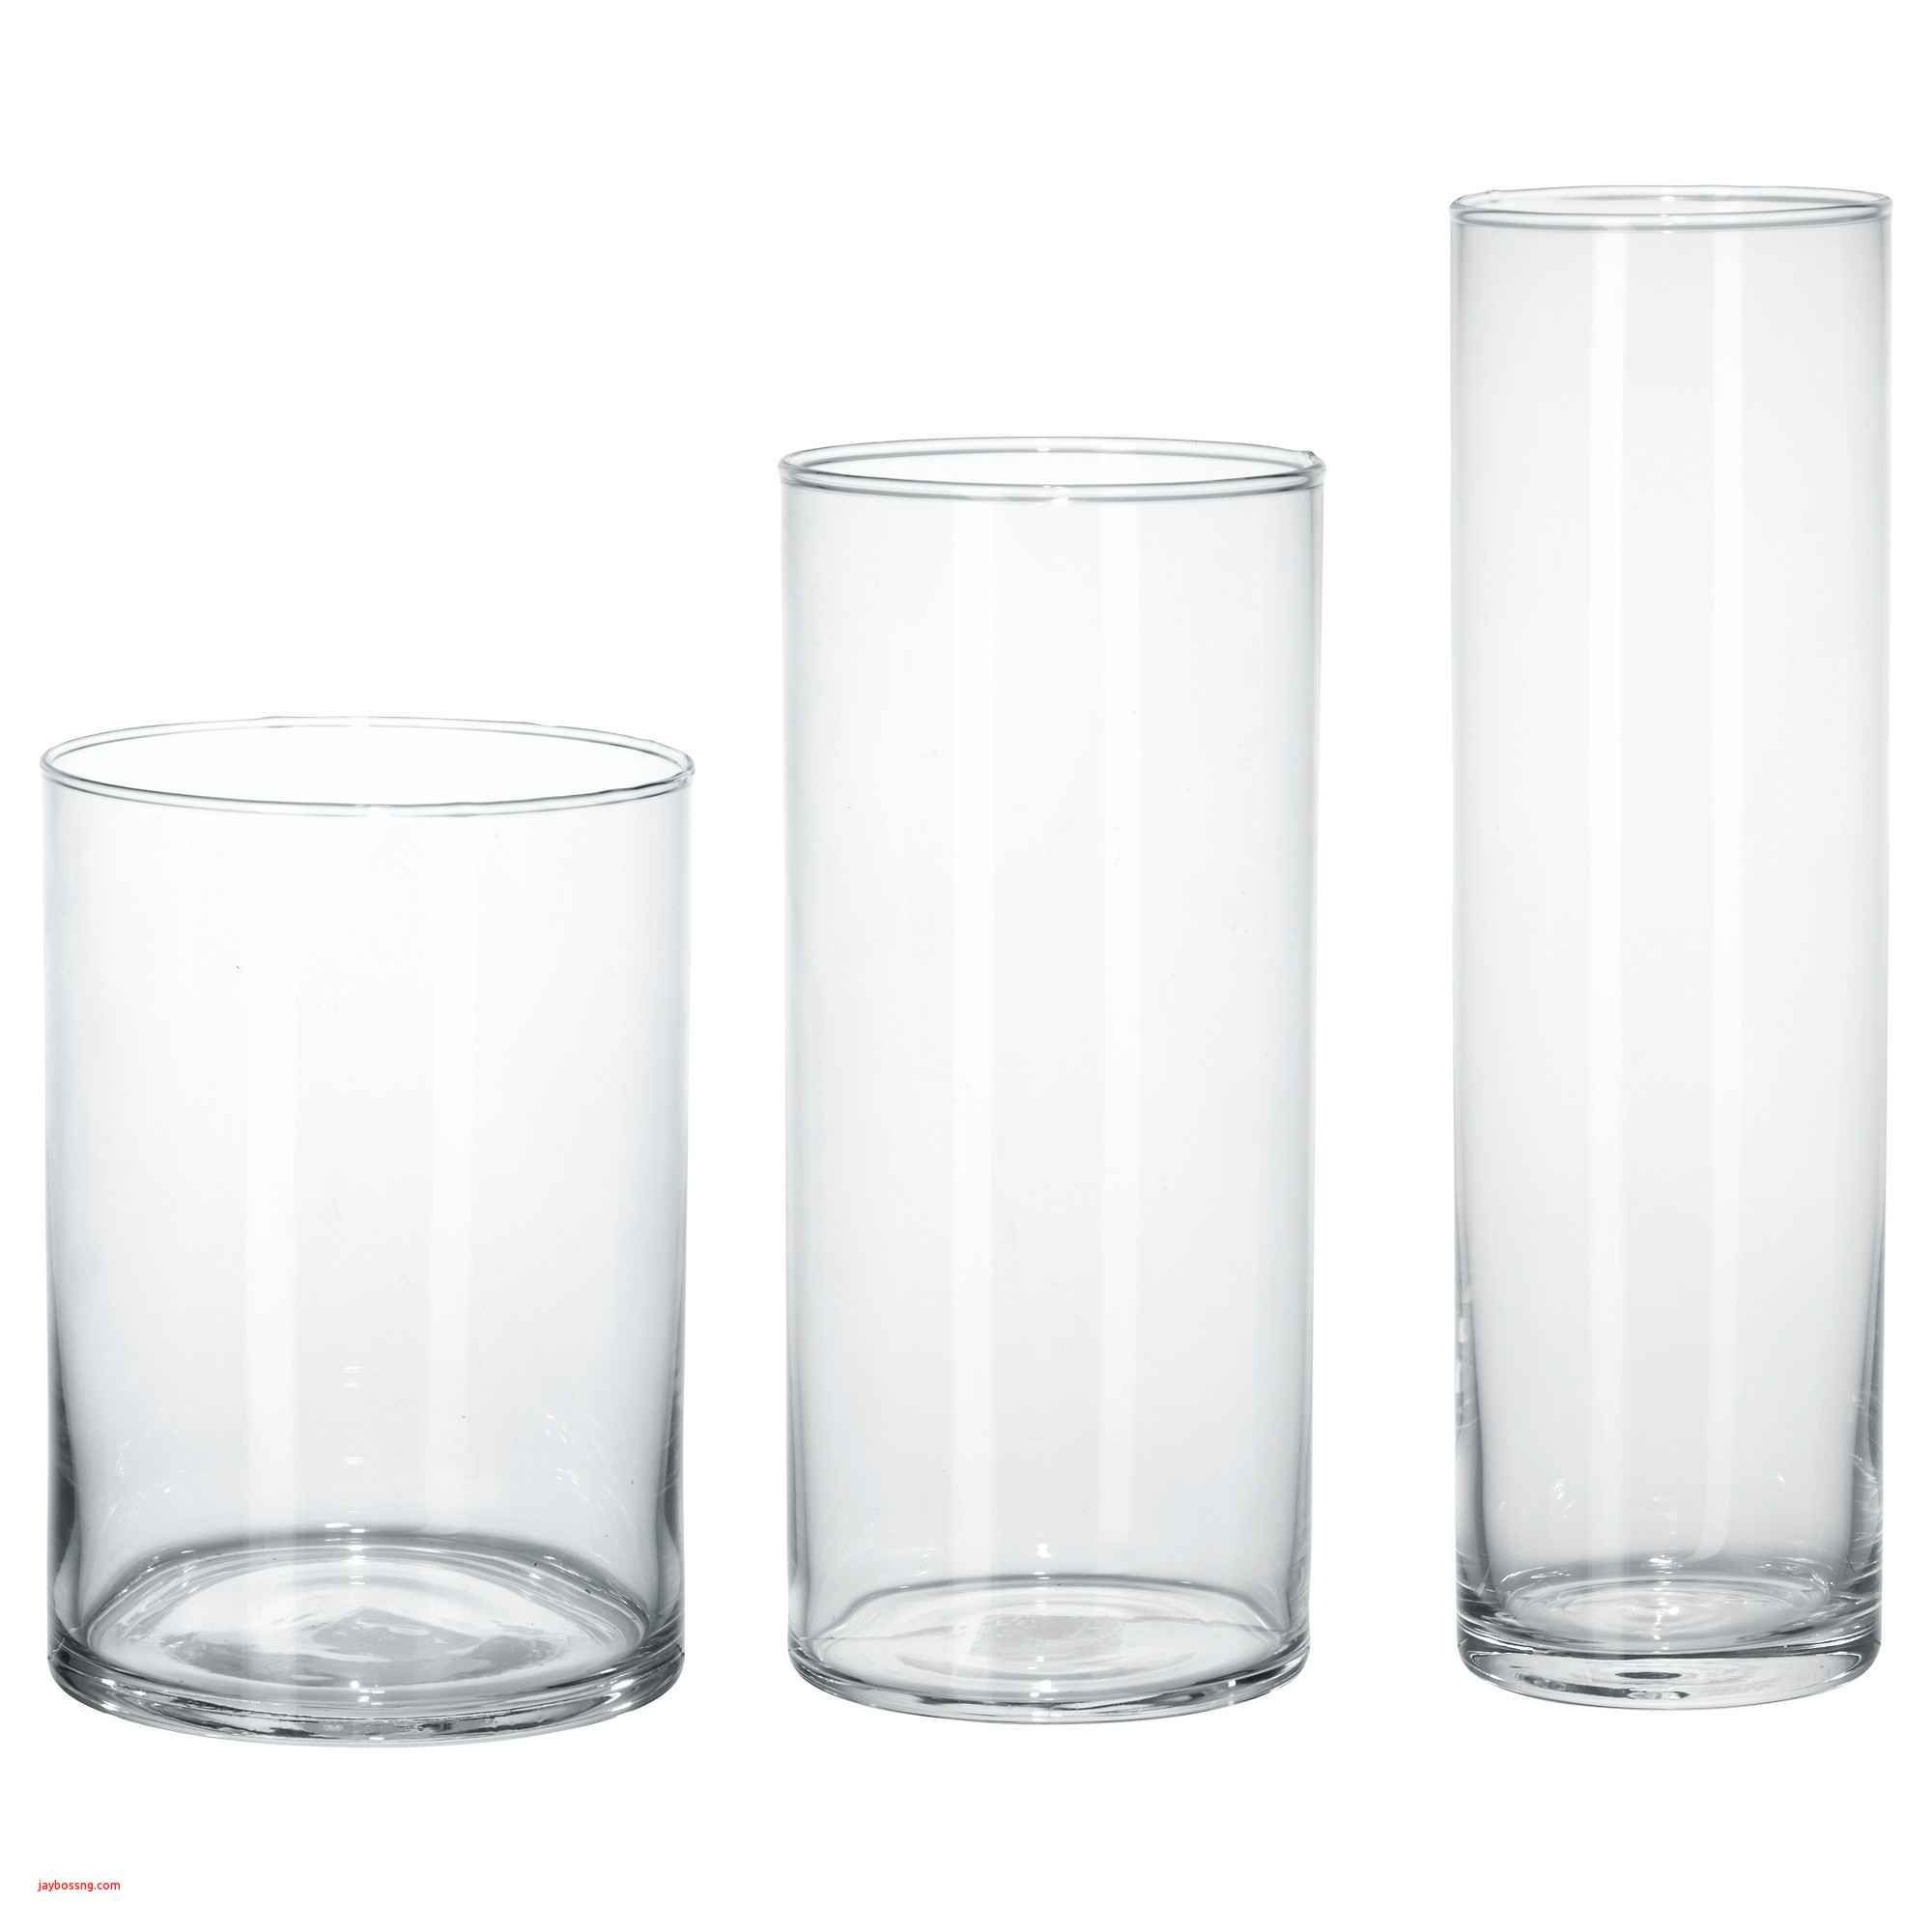 22 Ideal Small Clear Vases In Bulk 2024 free download small clear vases in bulk of black cylinder vase inspirational ikea white table created pe s5h with regard to black cylinder vase inspirational ikea white table created pe s5h vases ikea vas